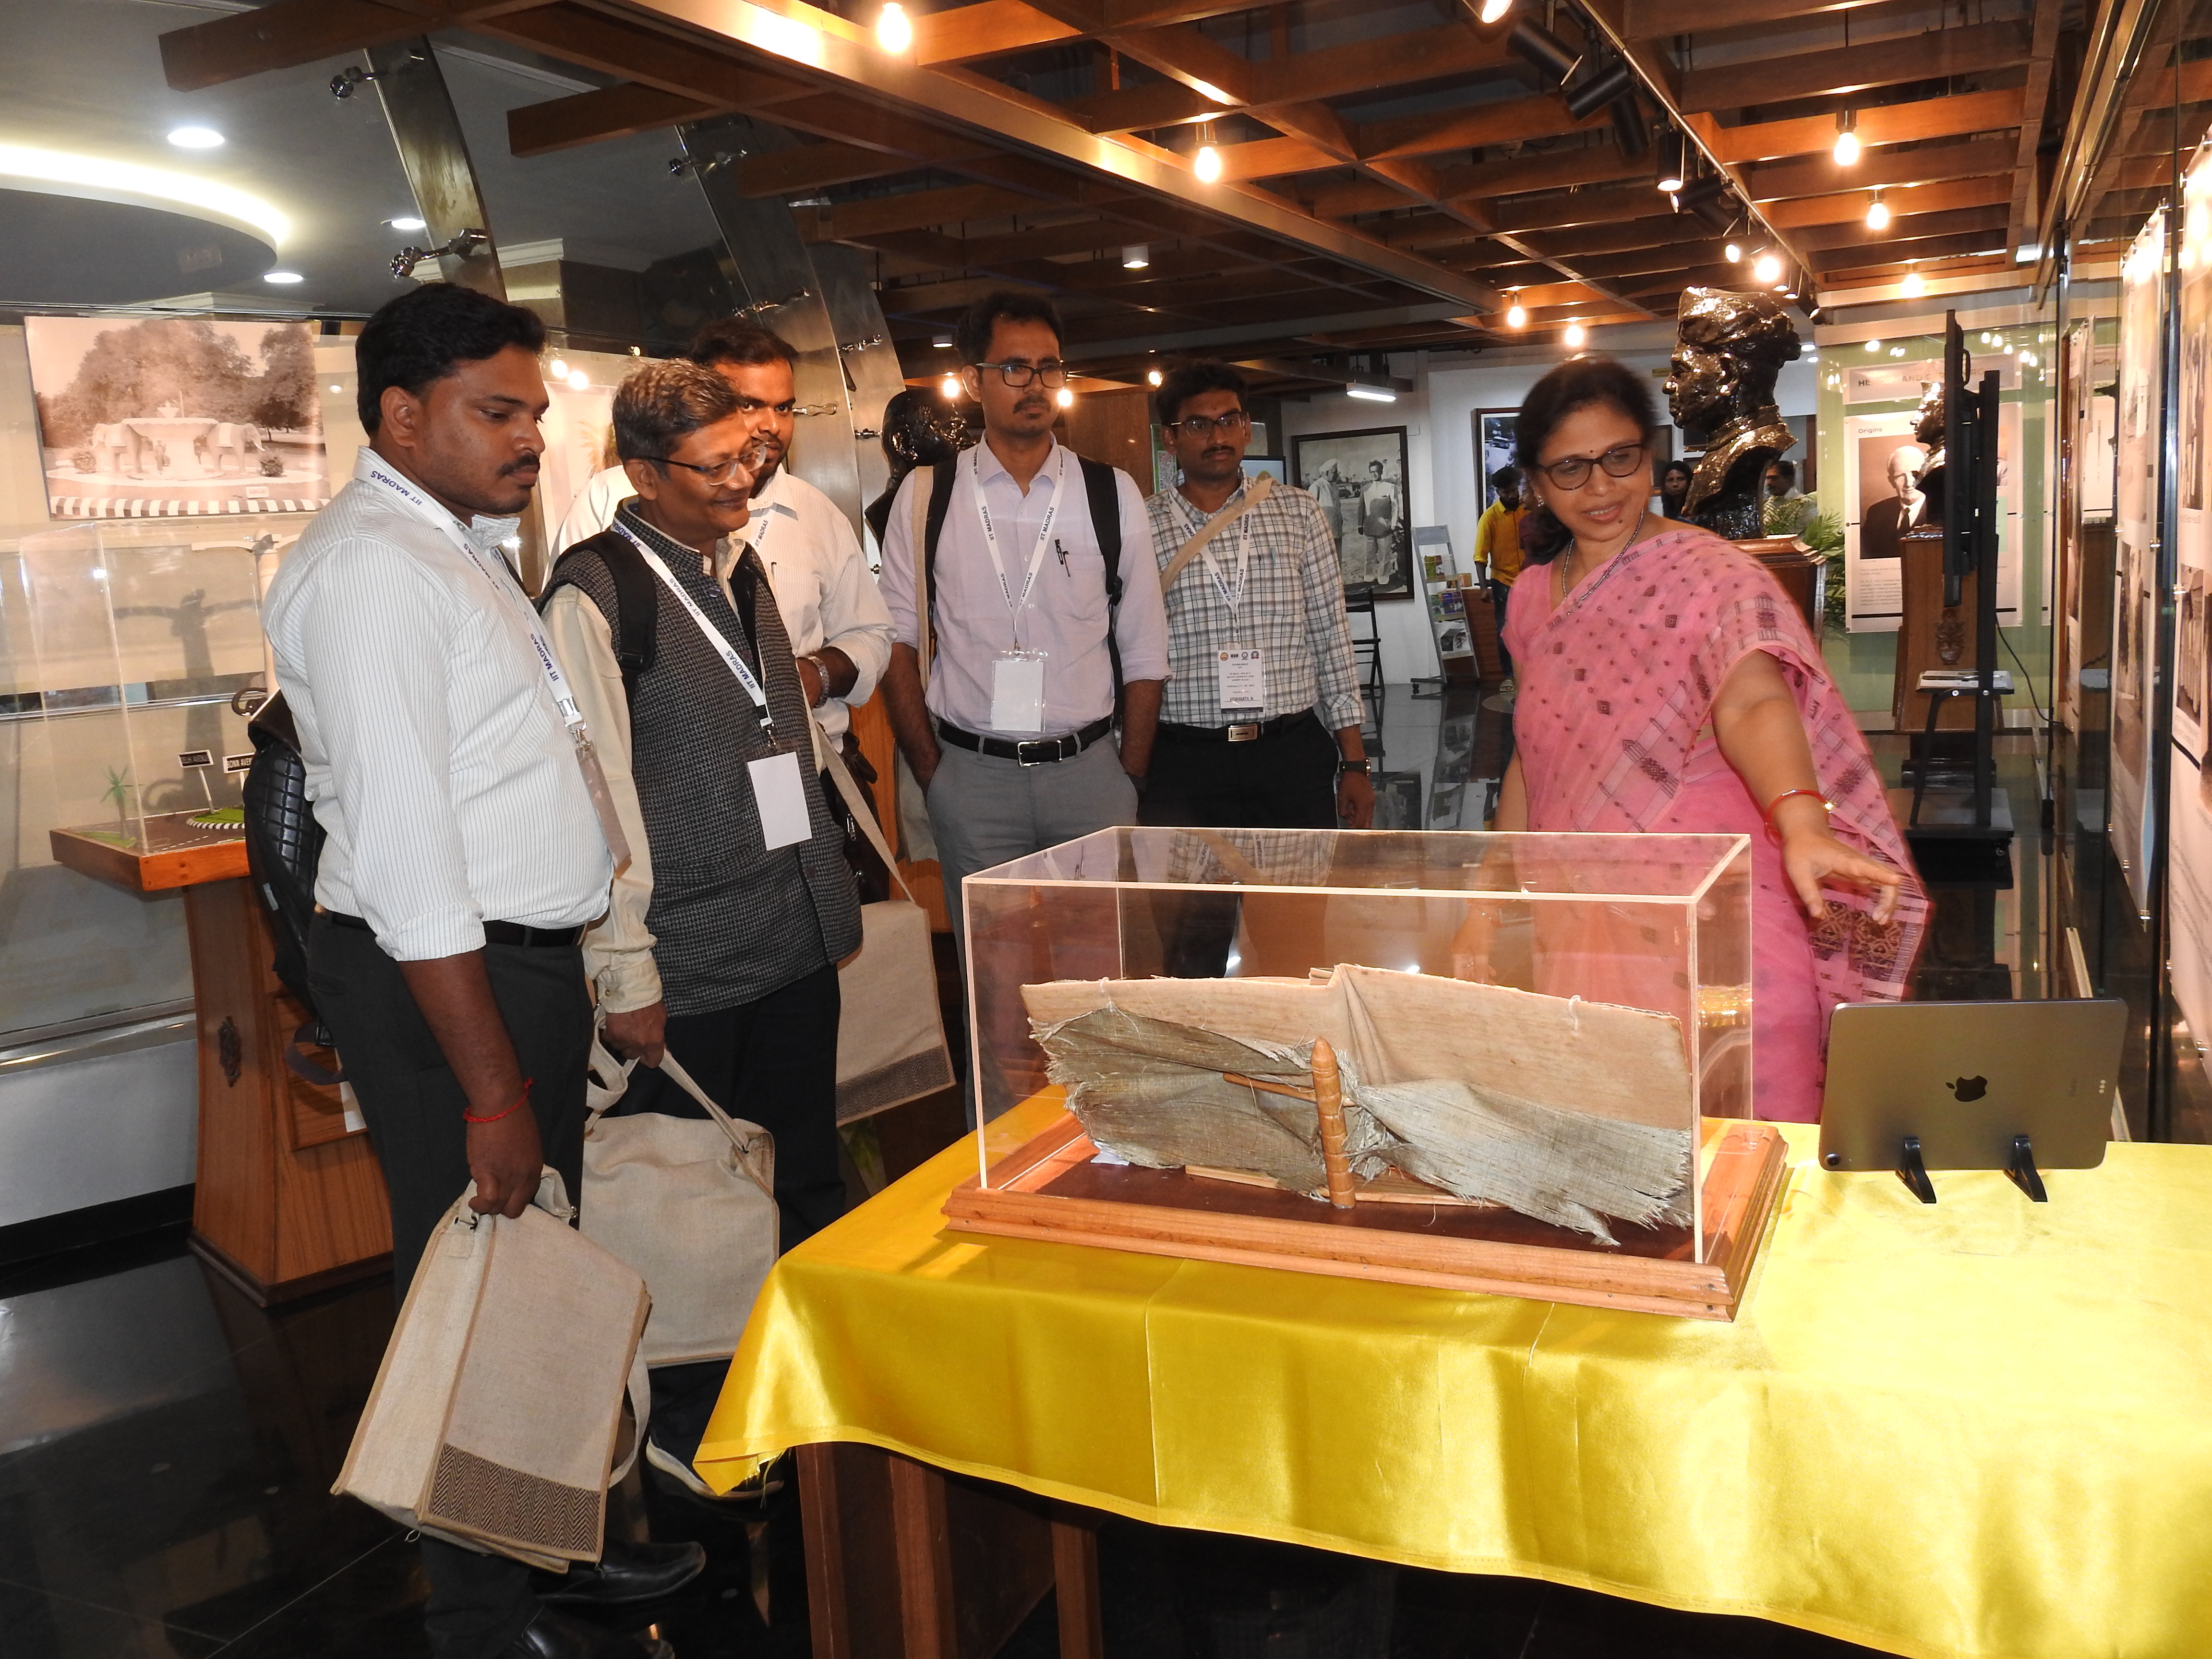 Mrs. Mamata Dash (Senior Project Officer of the Heritage Centre) shows visitors the Visitors' Book, an artefact on display at the Heritage Centre